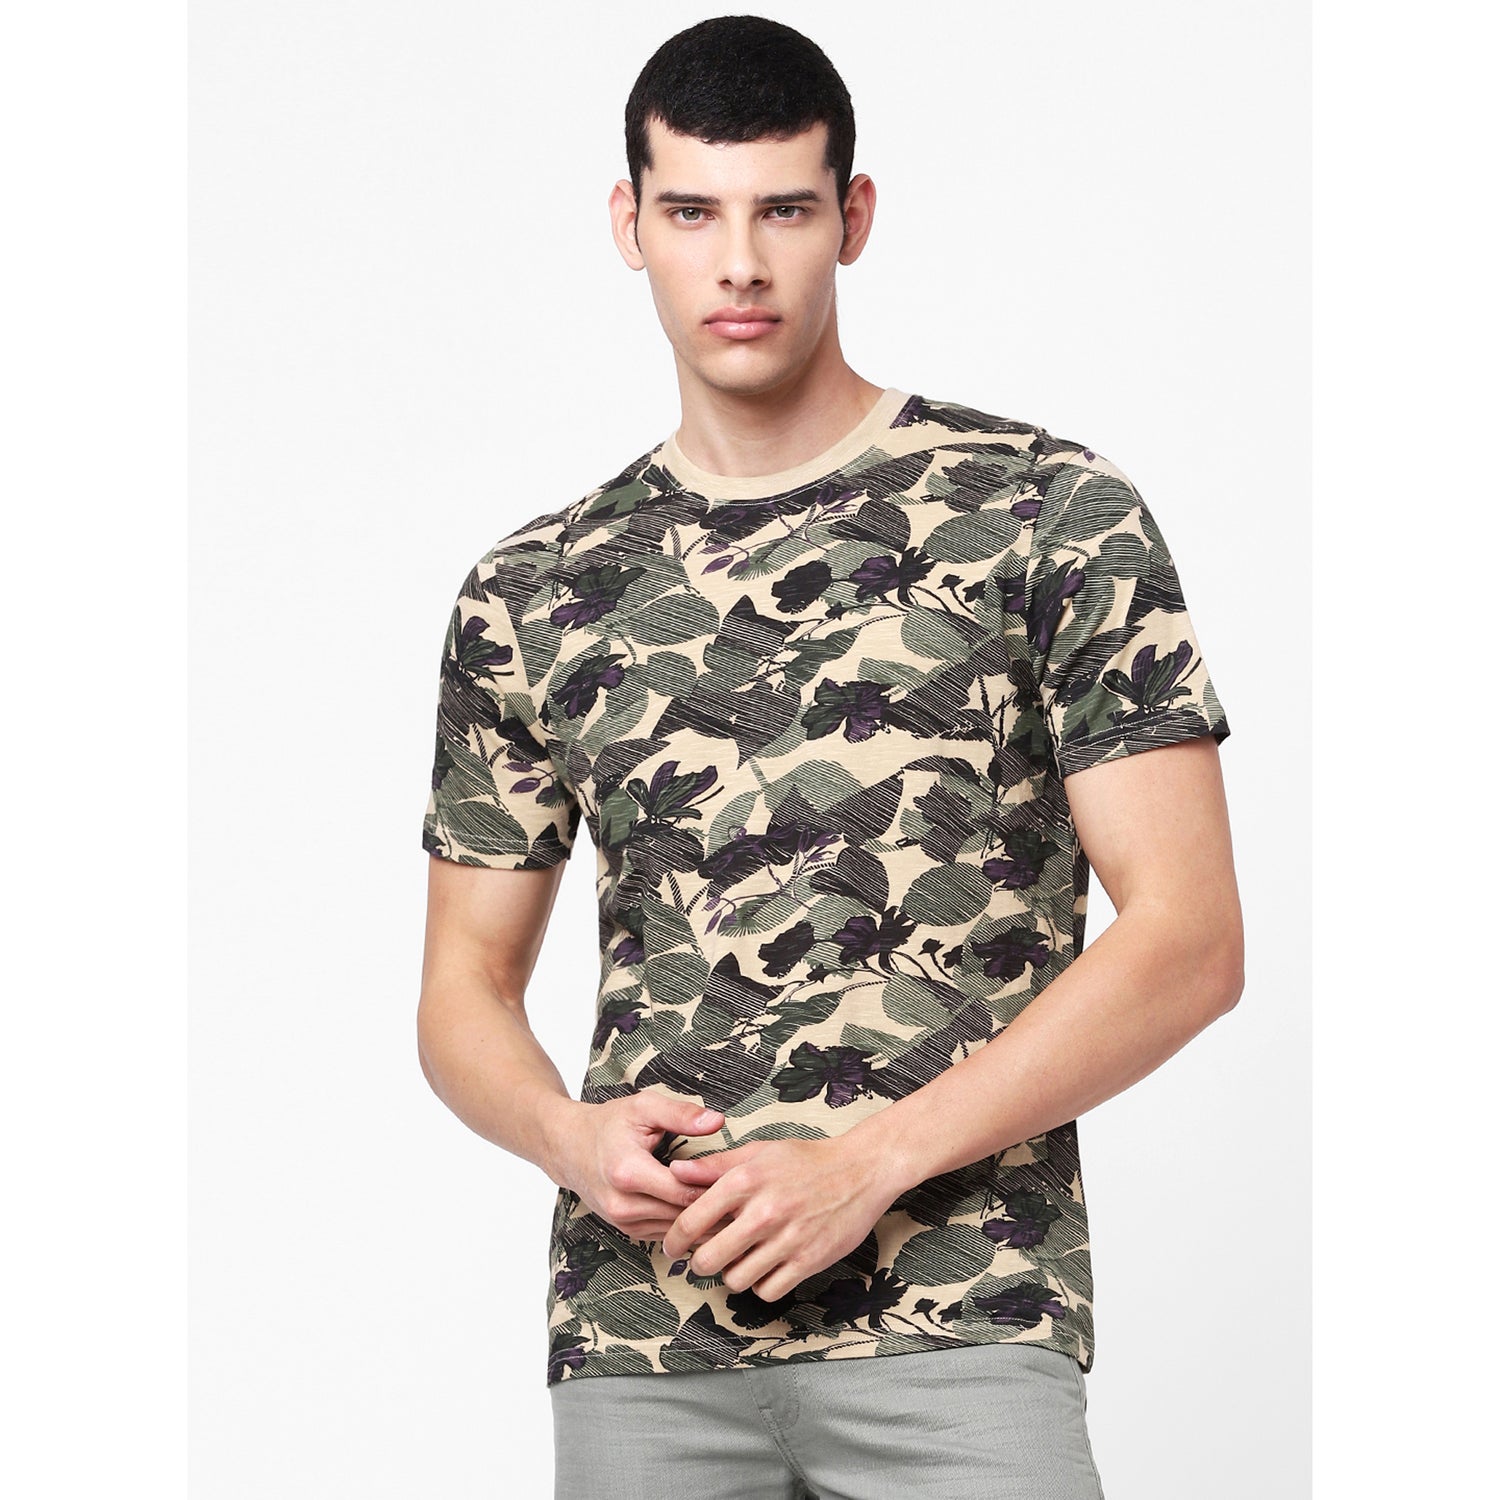 Off White and Green Camouflage Printed T-shirt (BELEAF)